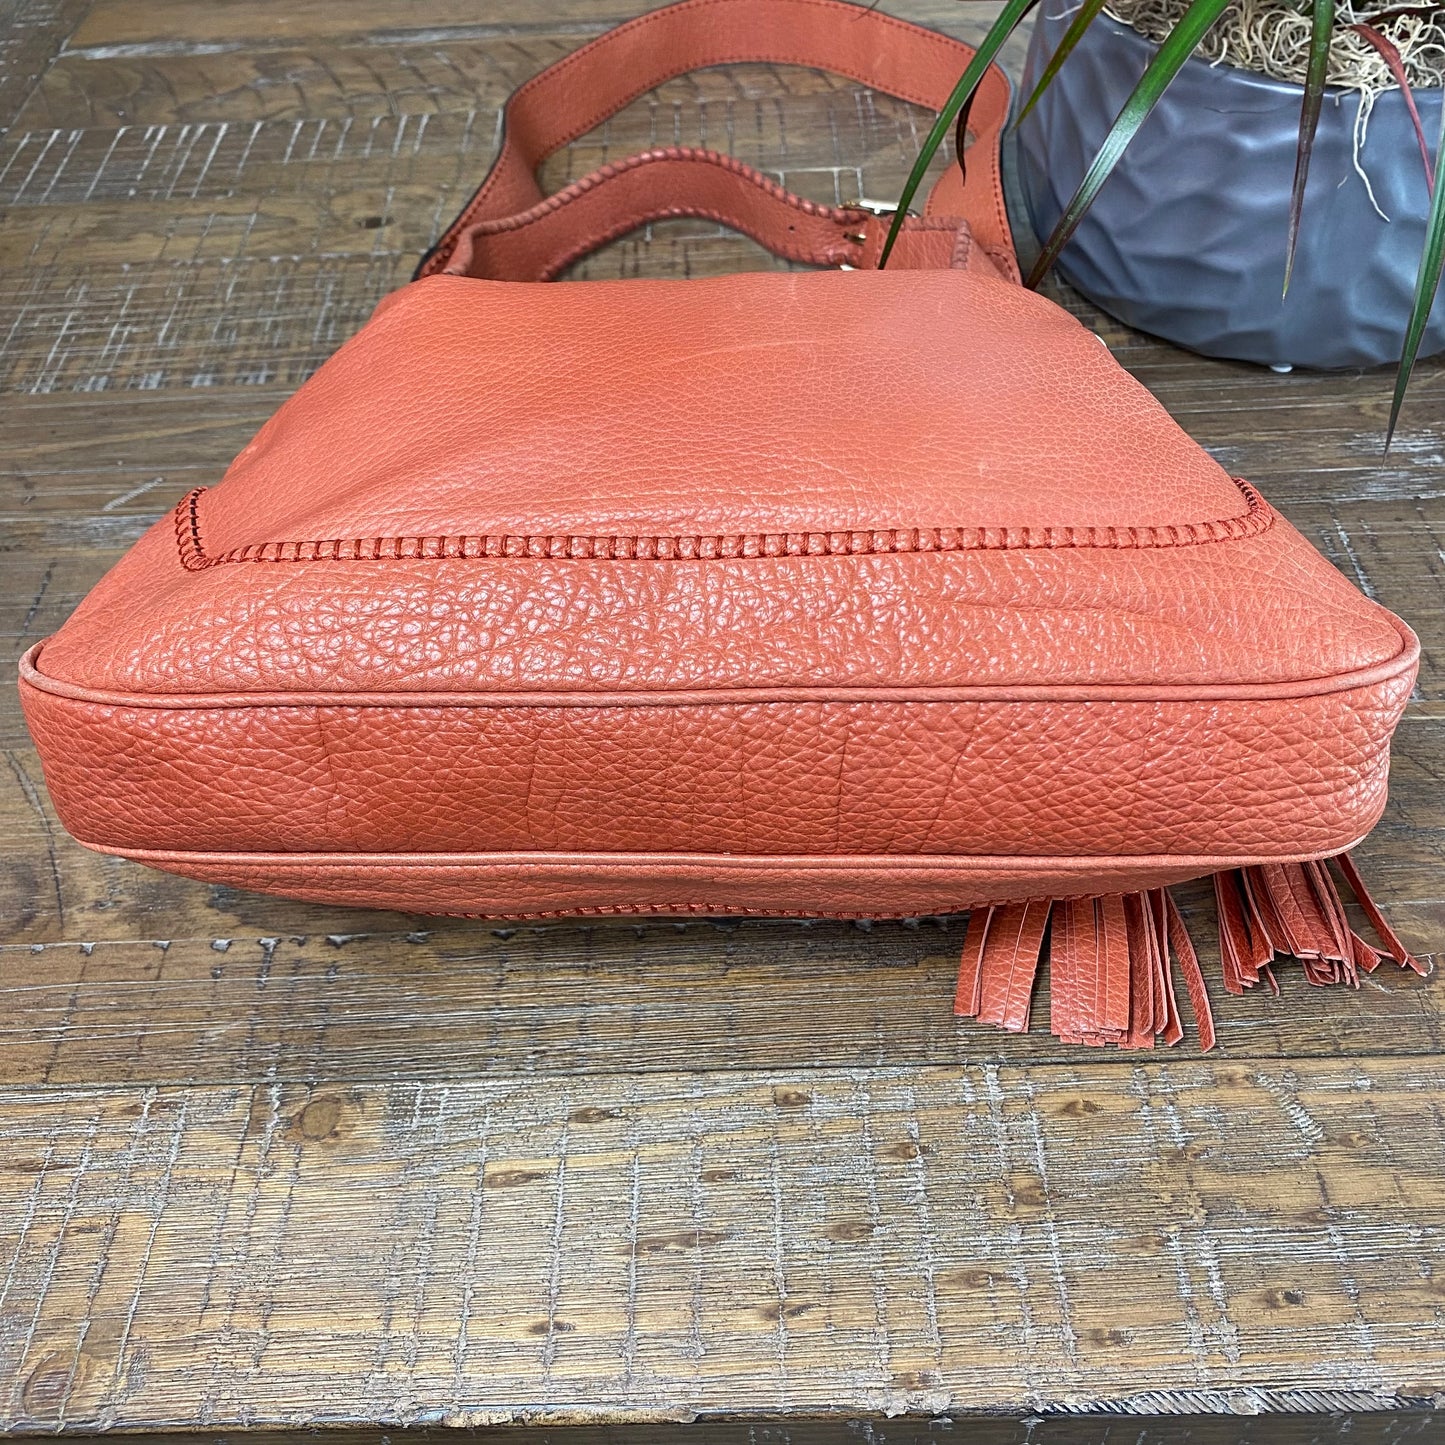 Gucci New Jackie Bamboo Whipstitch Hobo Bag